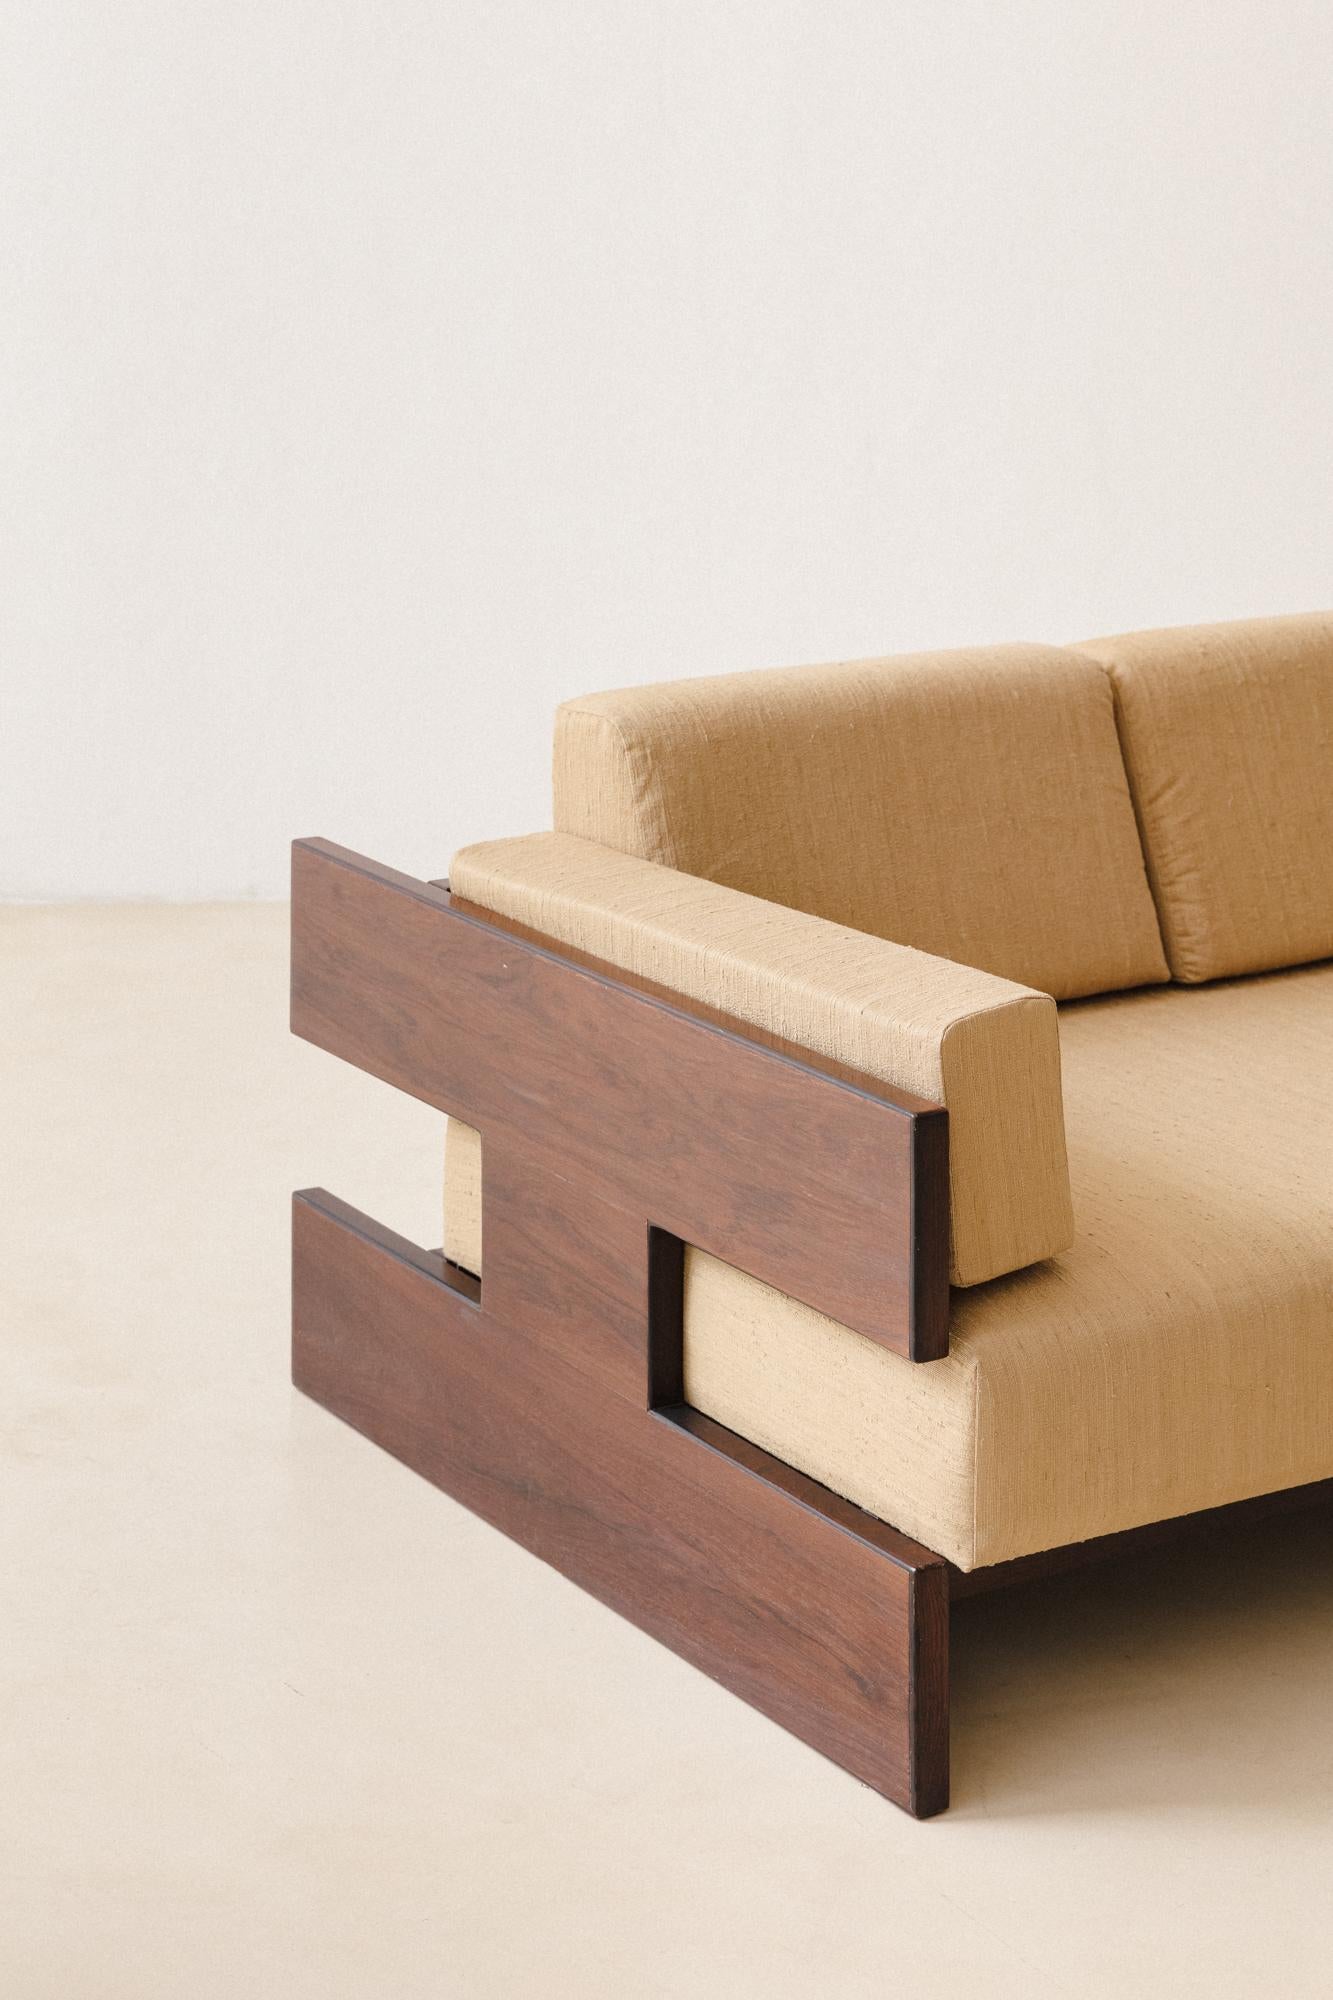 sofa design with wooden handle